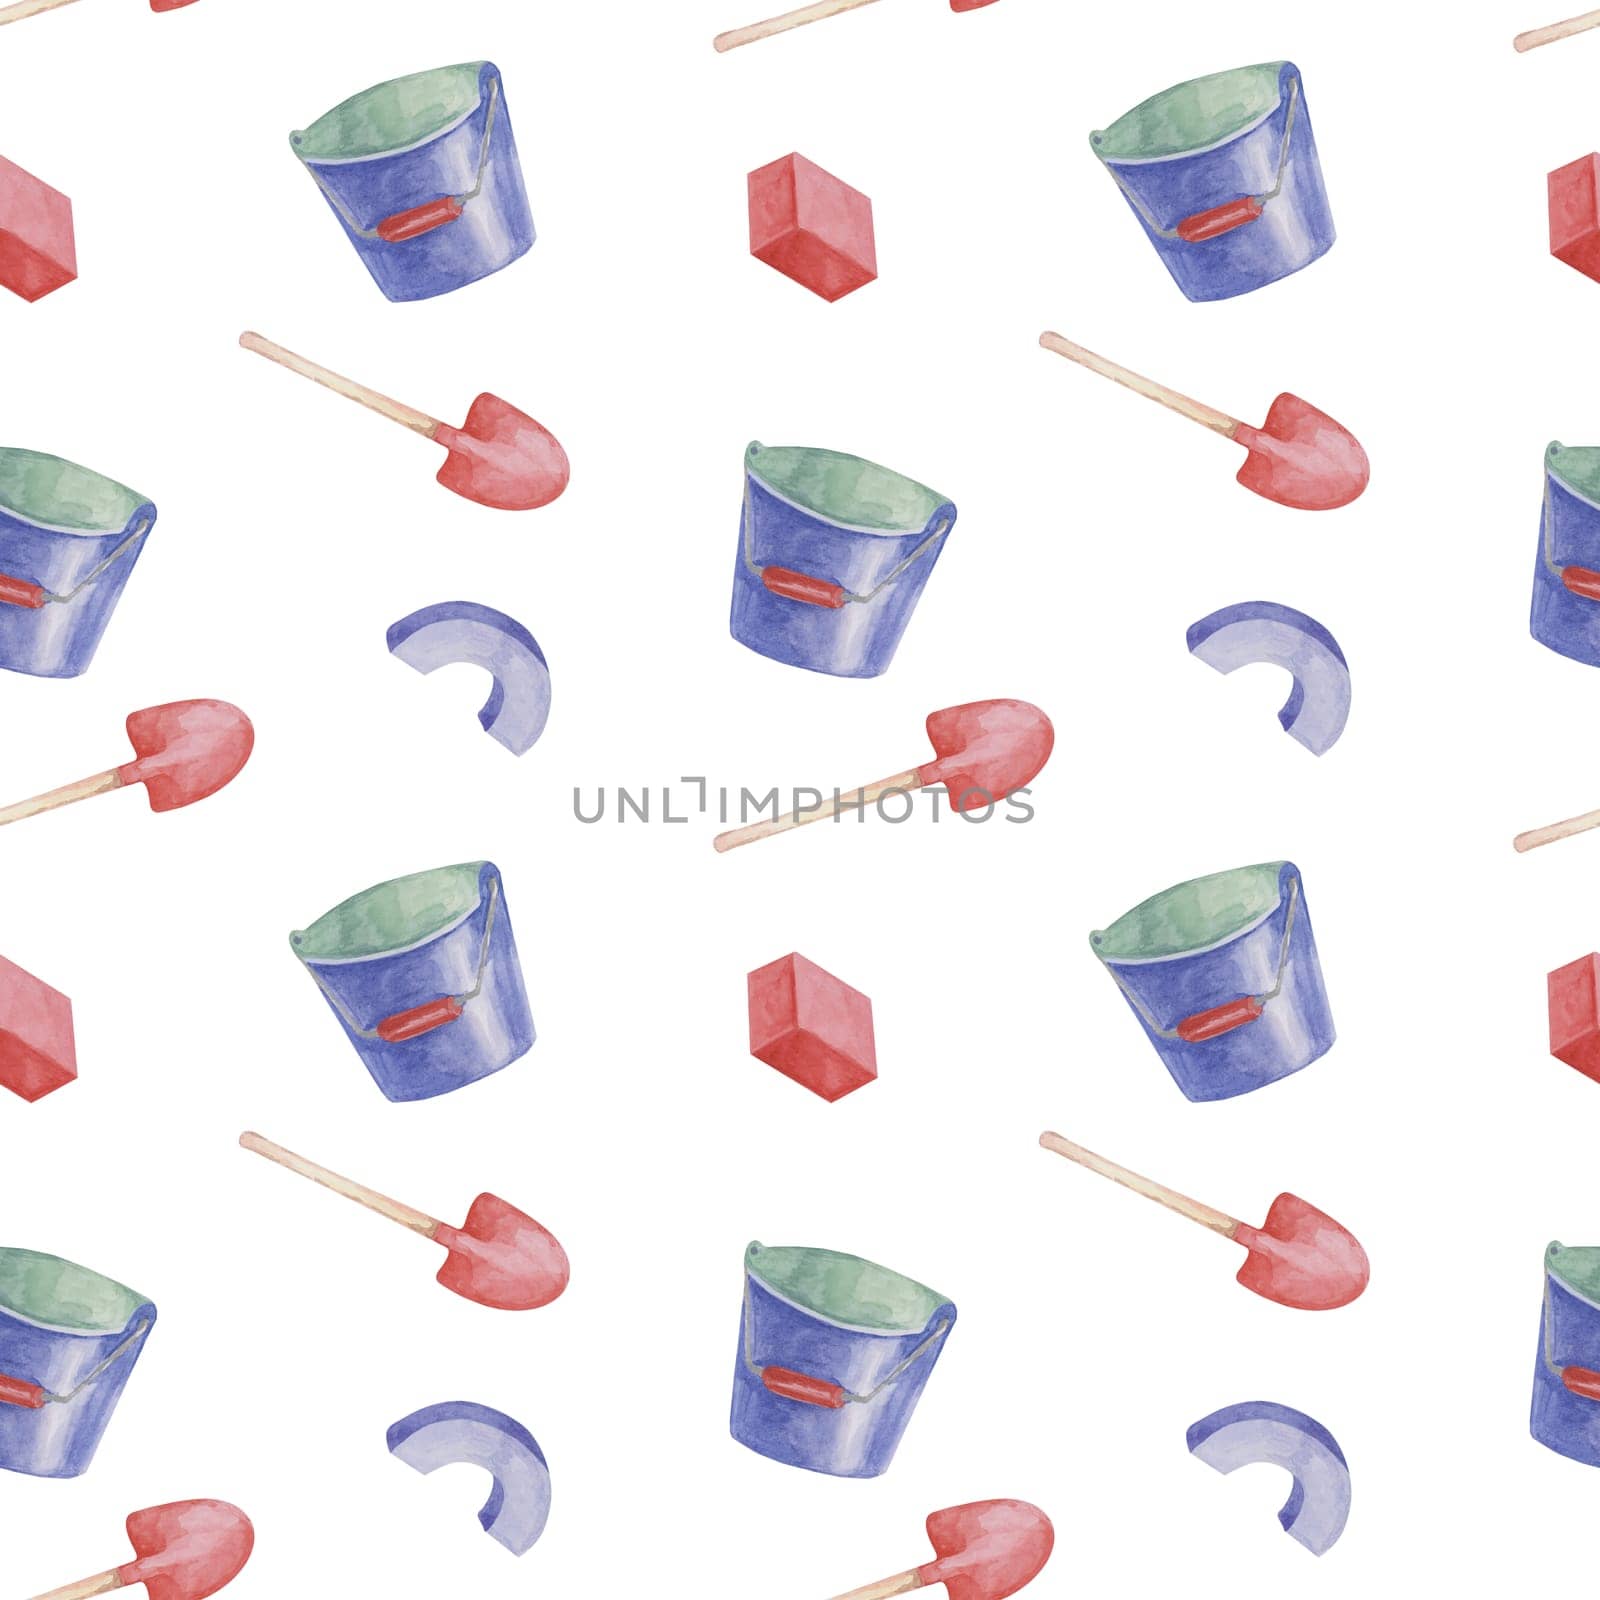 Bucket and shovel toys baby seamless pattern. Beach sand play tools. Textile print gardening tools for kids clothes, nursery wallpaper, bed linen by Fofito